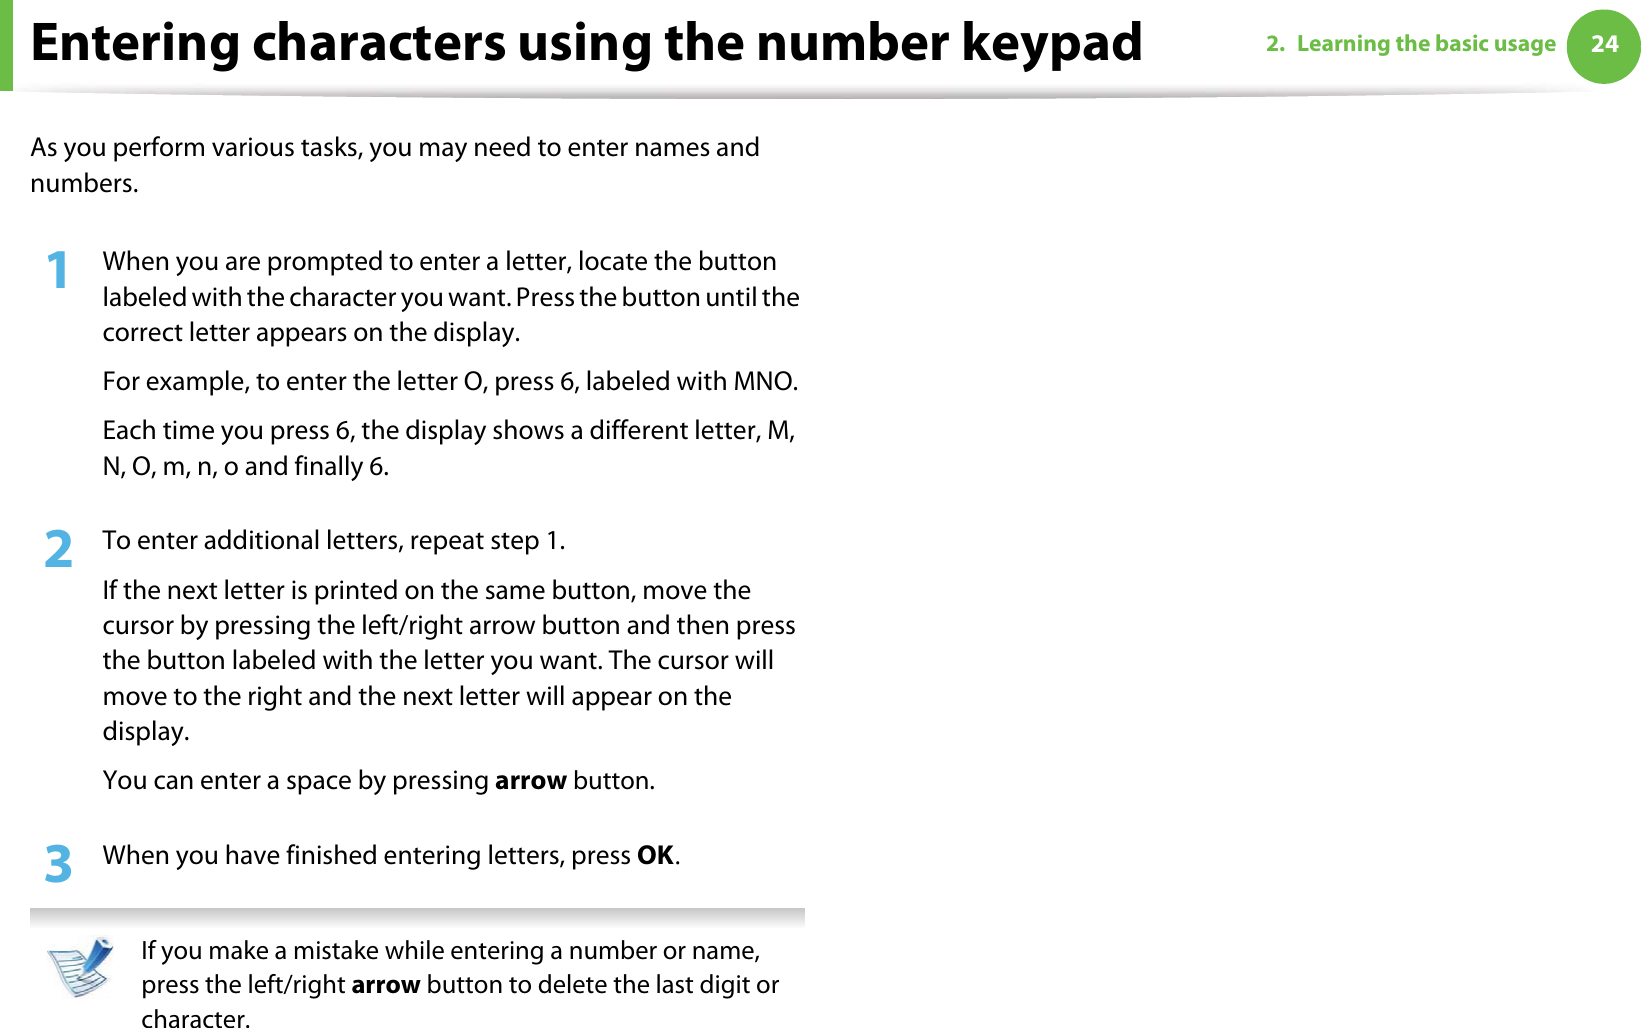 242. Learning the basic usageEntering characters using the number keypadAs you perform various tasks, you may need to enter names and numbers.1When you are prompted to enter a letter, locate the button labeled with the character you want. Press the button until the correct letter appears on the display.For example, to enter the letter O, press 6, labeled with MNO.Each time you press 6, the display shows a different letter, M, N, O, m, n, o and finally 6.2  To enter additional letters, repeat step 1.If the next letter is printed on the same button, move the cursor by pressing the left/right arrow button and then press the button labeled with the letter you want. The cursor will move to the right and the next letter will appear on the display.You can enter a space by pressing arrow button.3  When you have finished entering letters, press OKU If you make a mistake while entering a number or name, press the left/right arrow button to delete the last digit or character. 